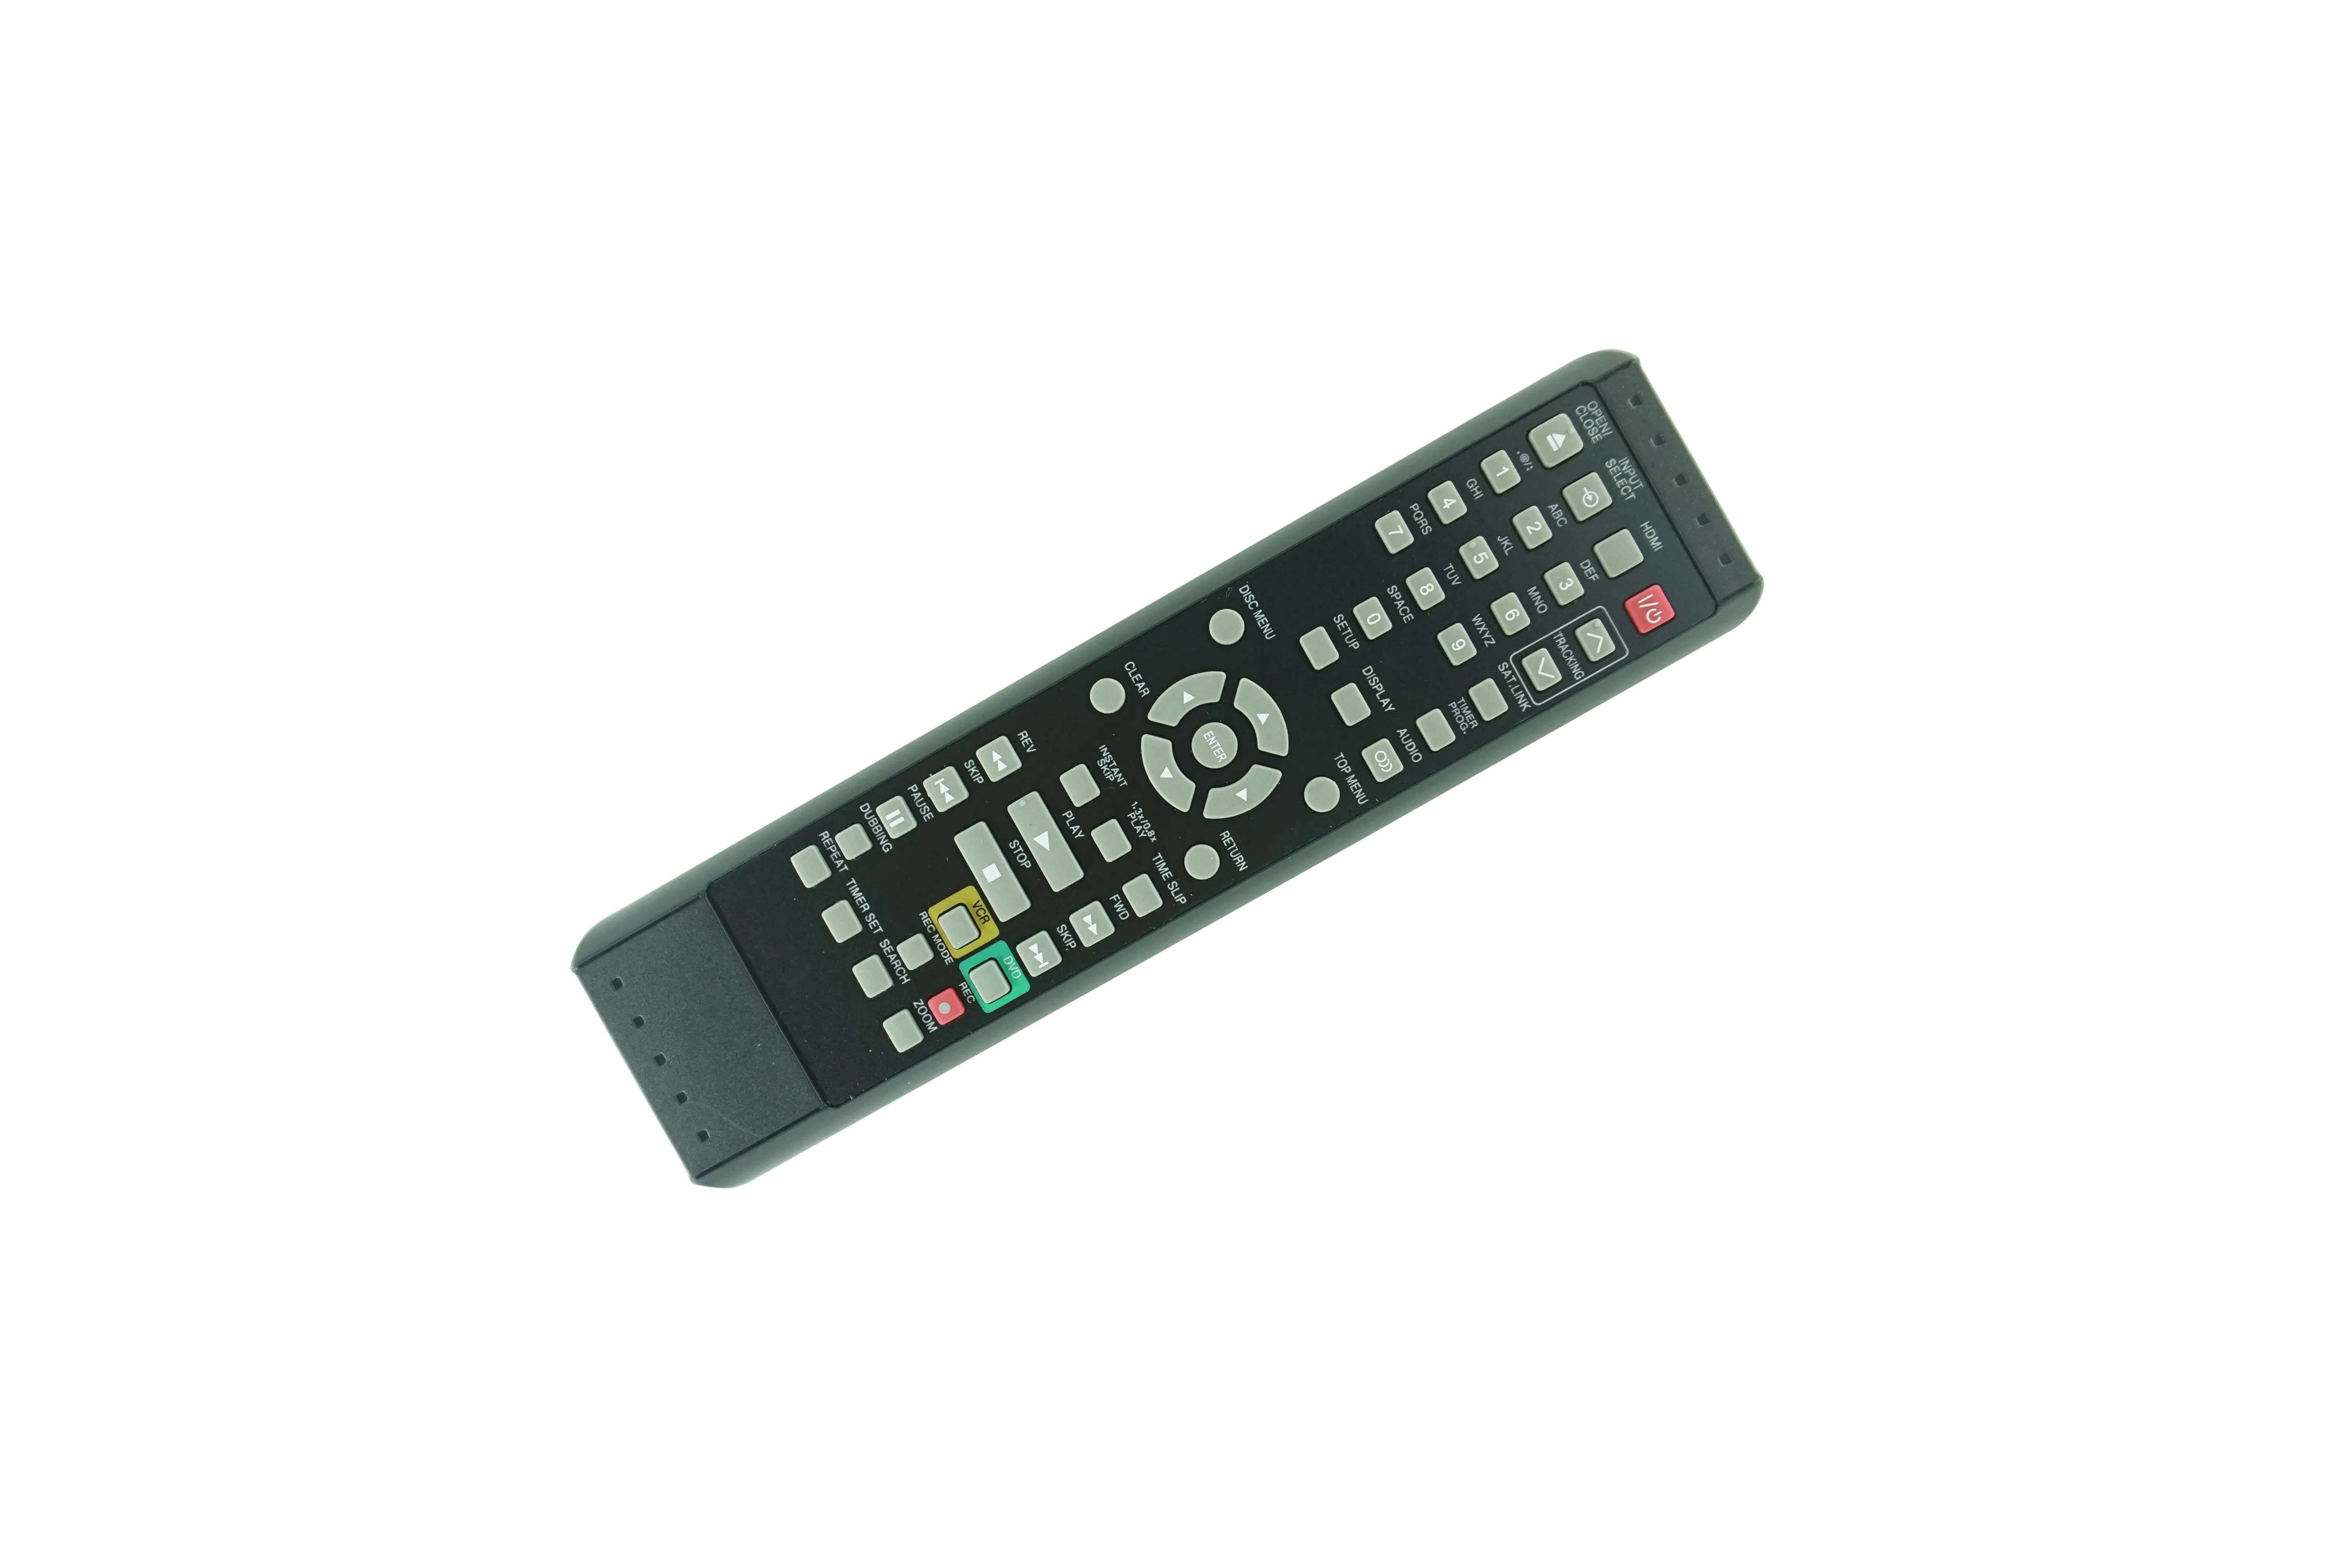 Replacement Remote Control For Toshiba SE-R0343 DVR80KF DVR70DTKF2 SE-R0342 DVR19DTKB D-VR600KU NB340UD SE-R0273 D-VR17KB DVD VIDEO CASSETTE RECORDER Player